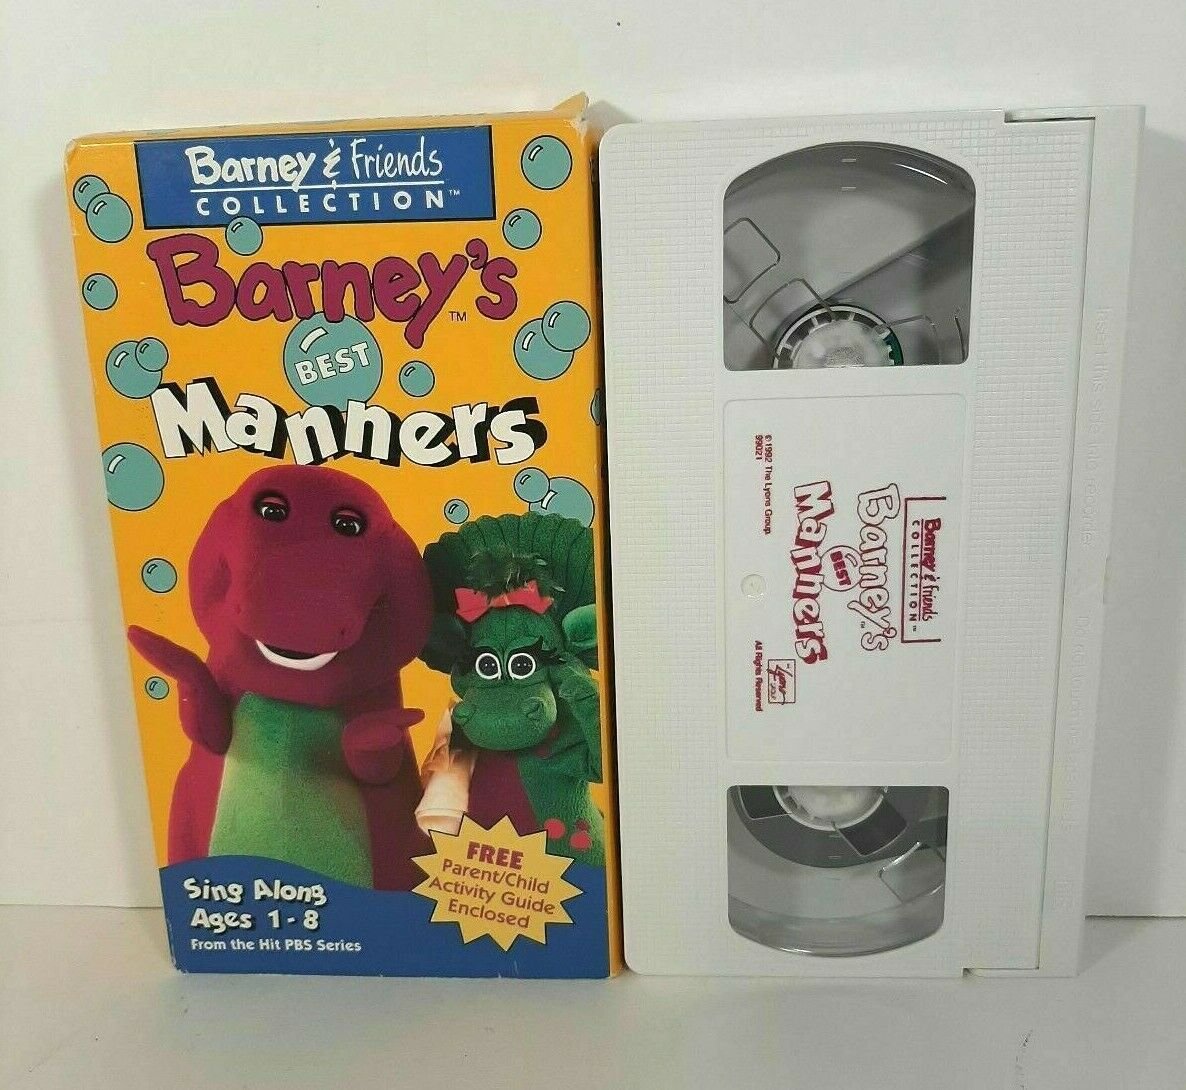 Barney S Best Manners Vhs Video Tape Barney Friends Collection